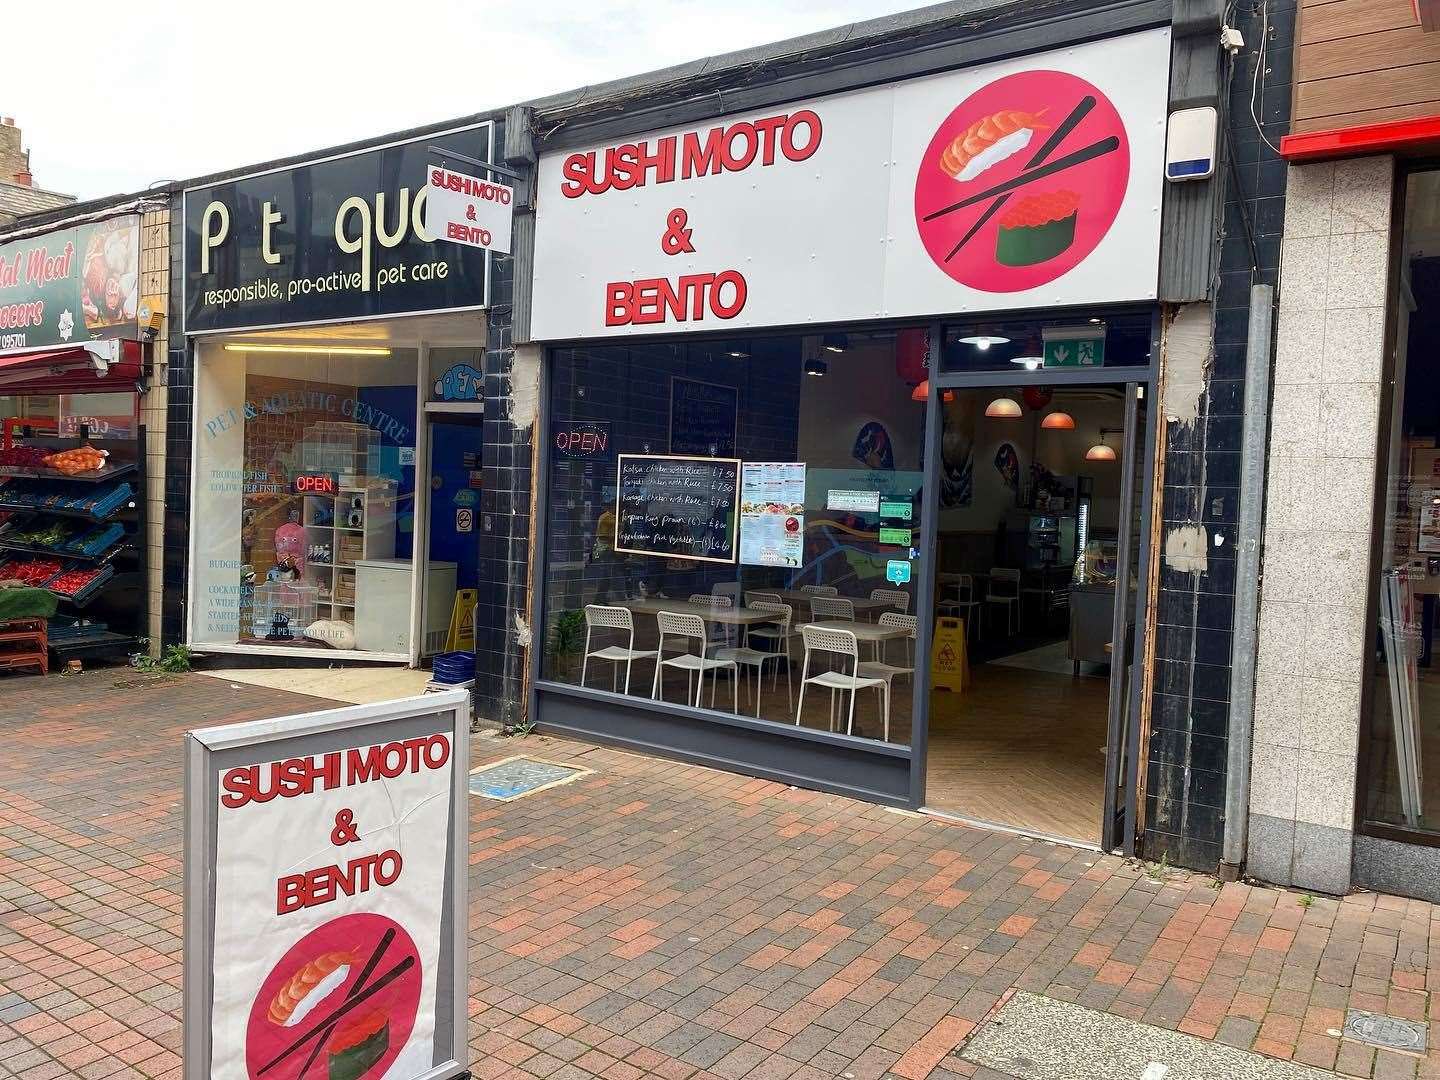 Sushi Moto and Bento is serving customers in Chatham Town Centre. Picture: Sushi Moto and Bento